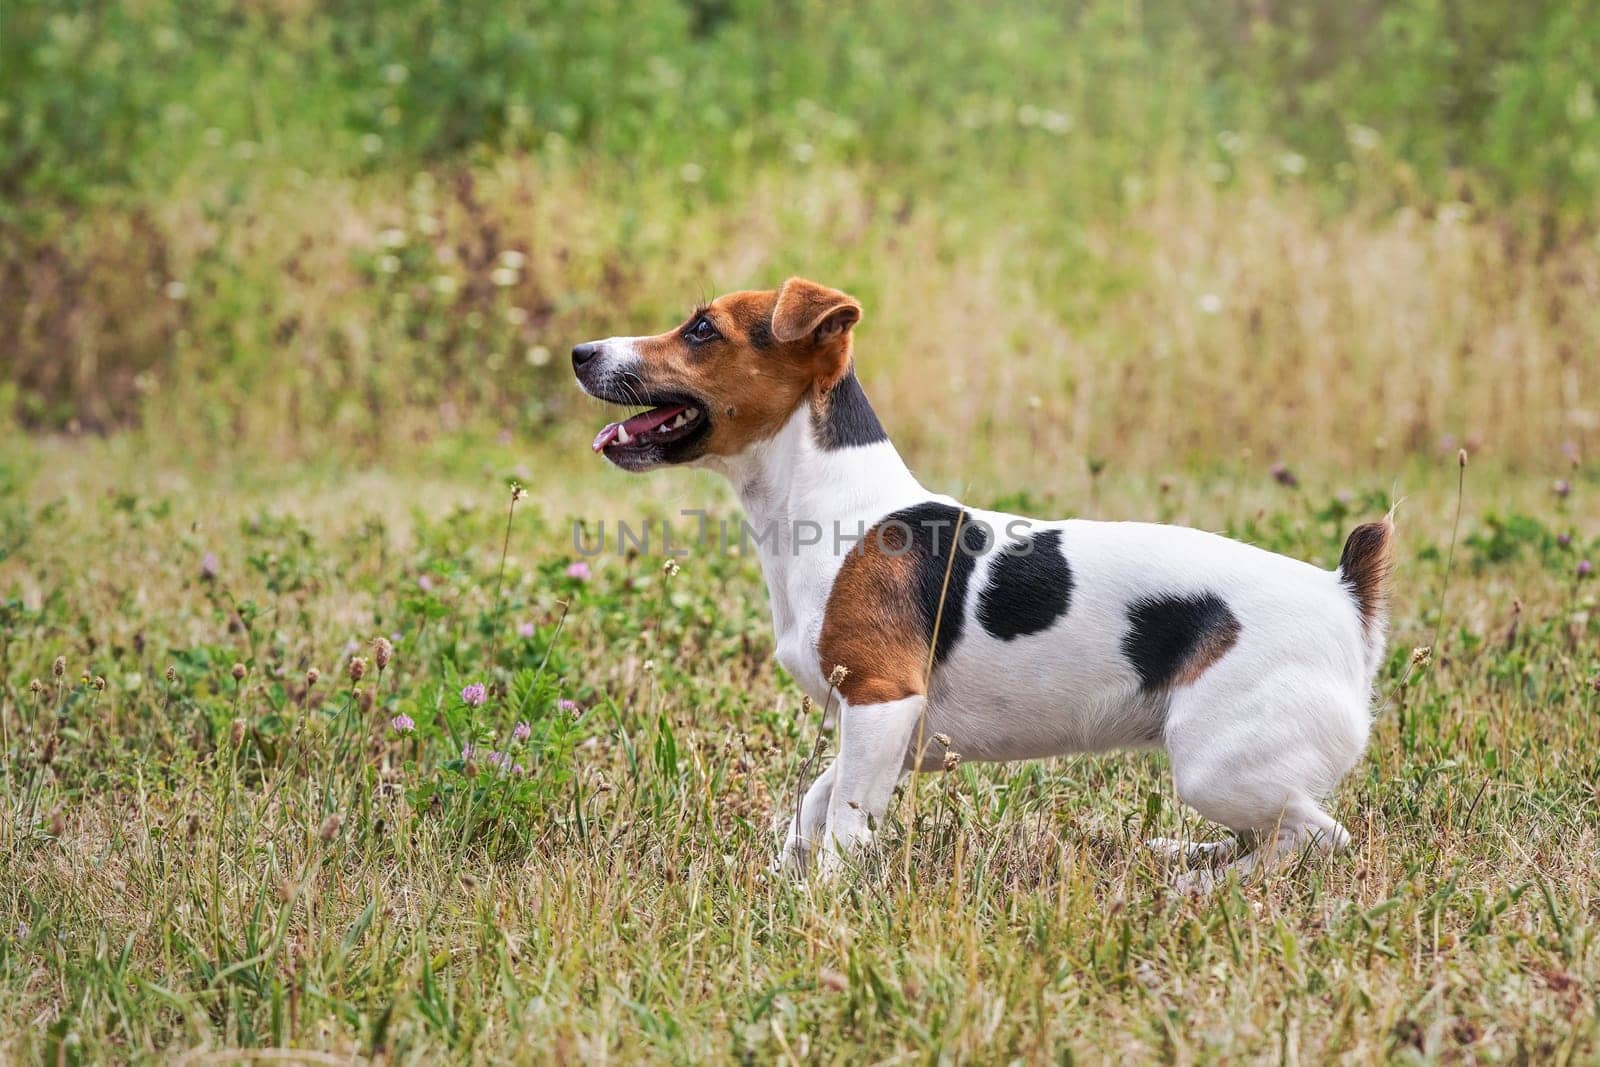 Jack Russell terrier dog on meadow, her mouth opened with tongue out, view from side by Ivanko